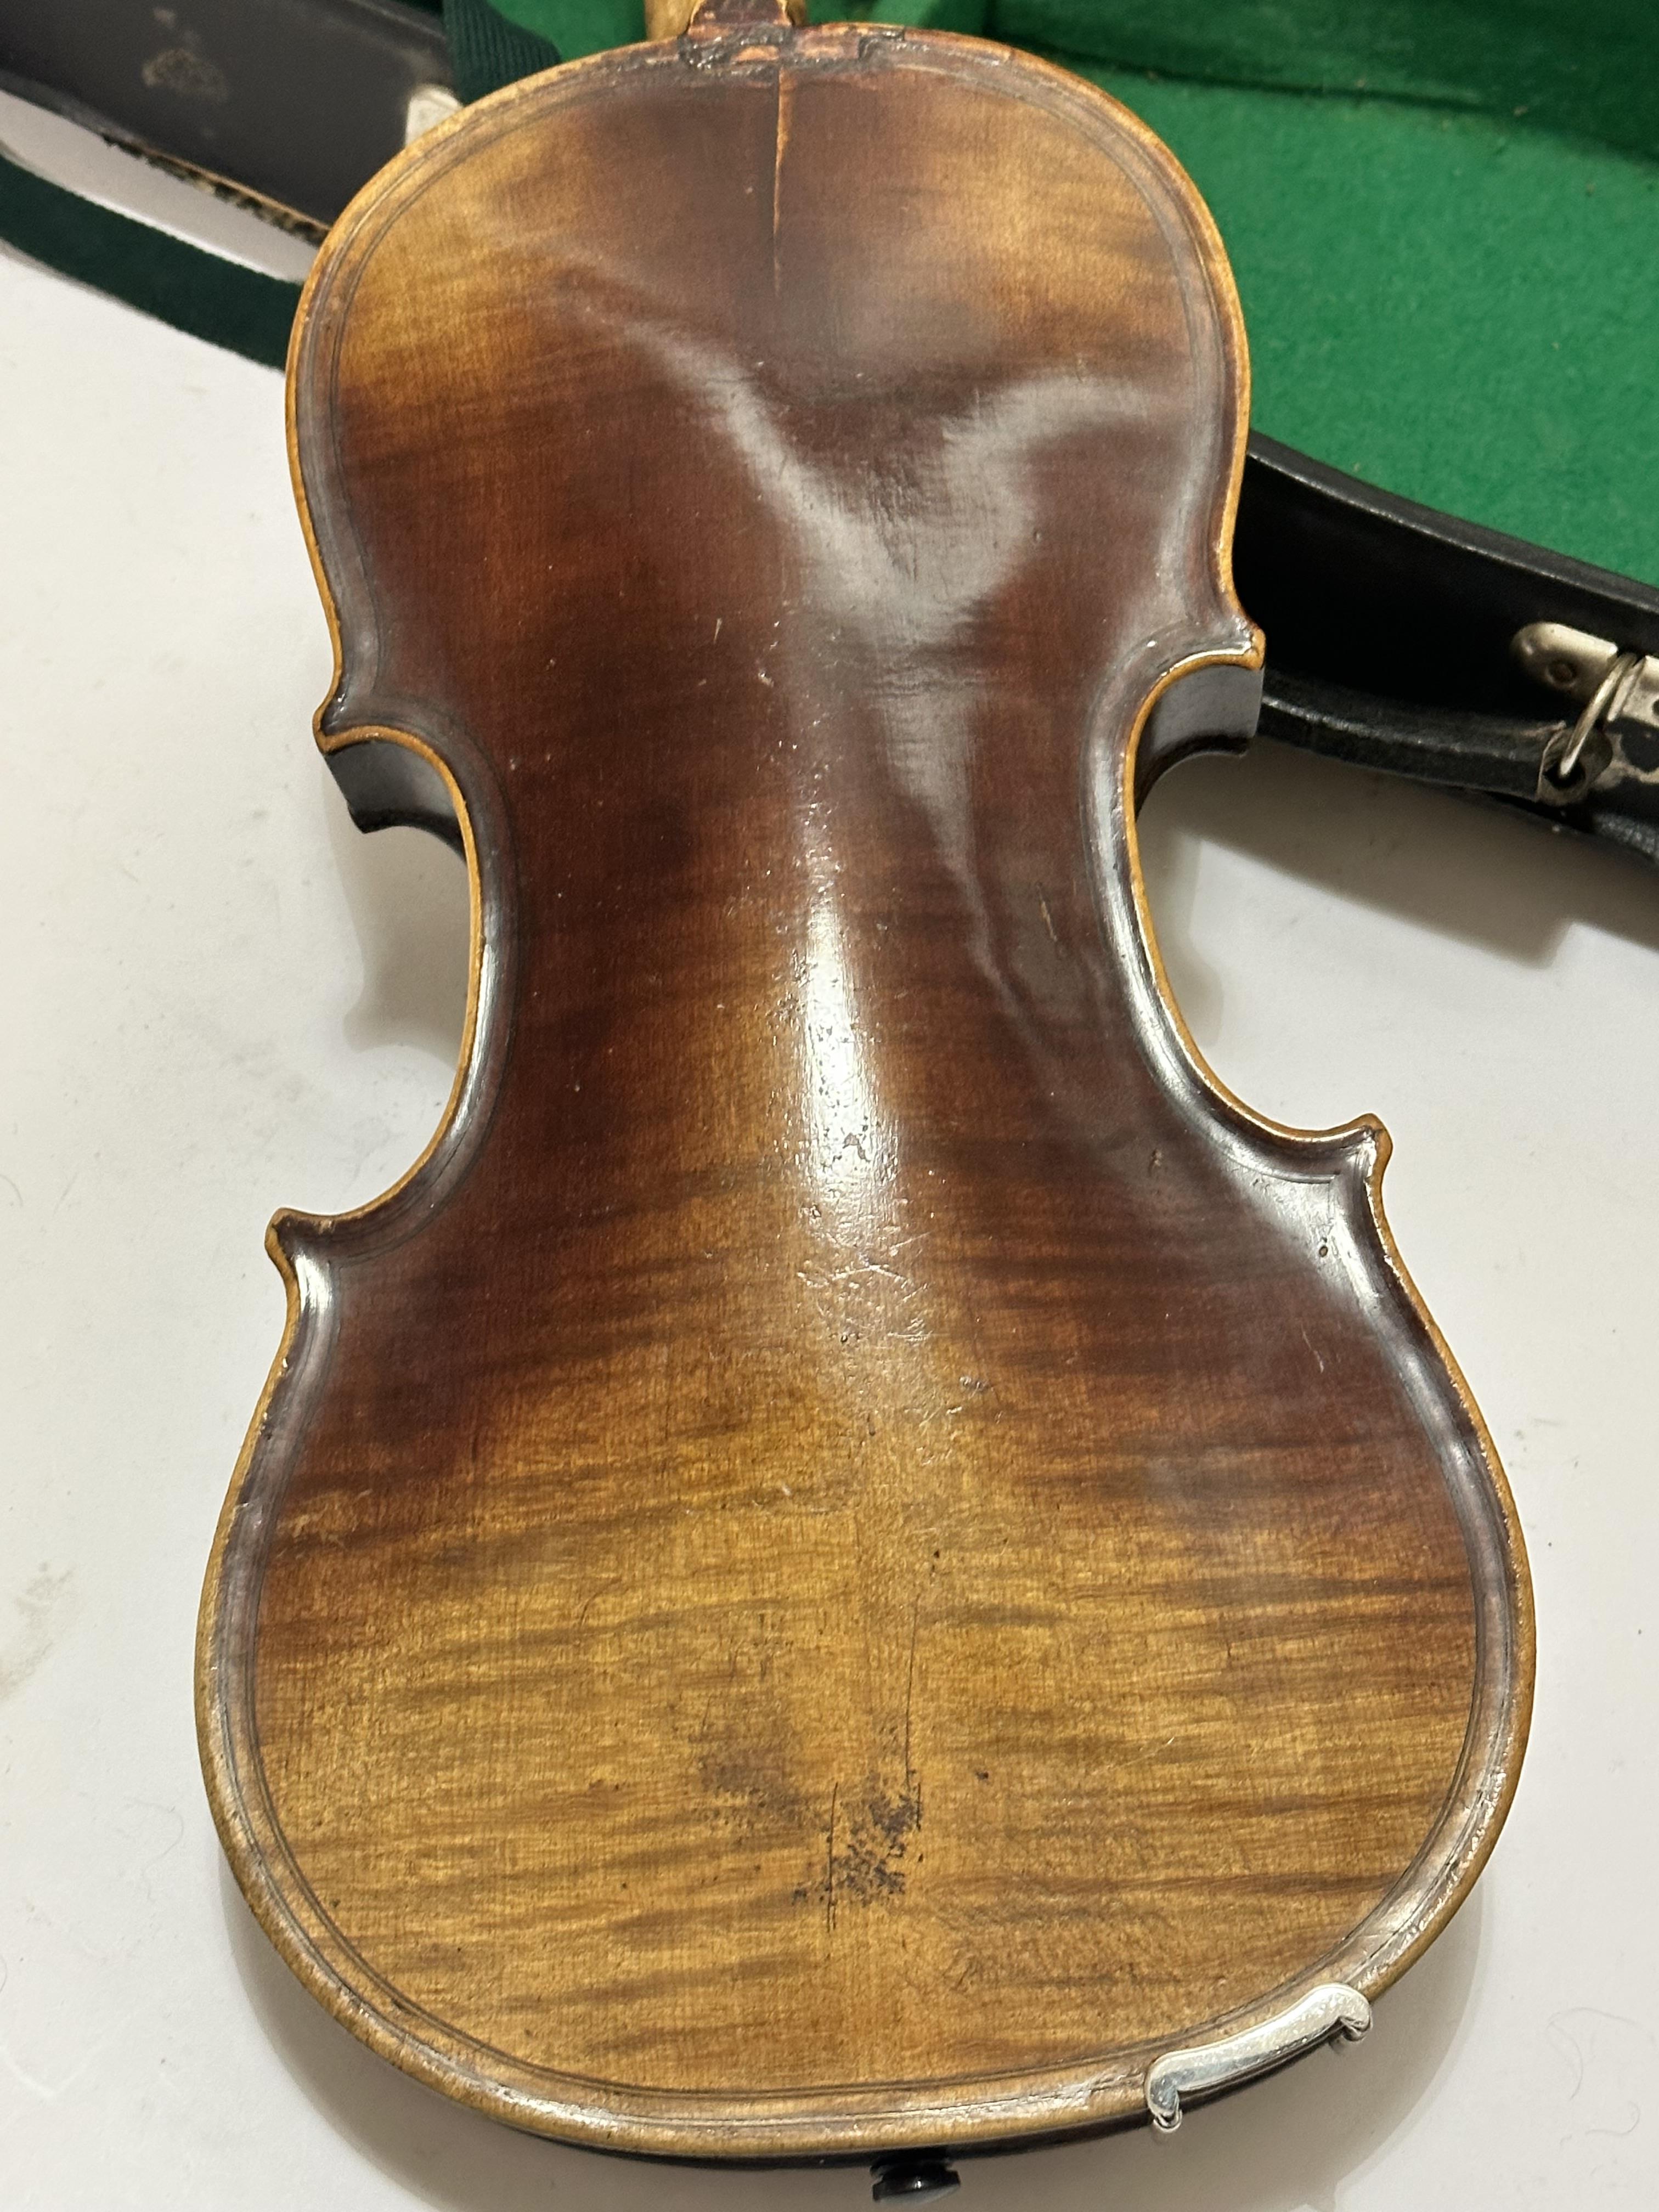 An Italian Magini two piece violin with paper label D E U T I C H E U R B E I T, spilt at back and - Image 4 of 8